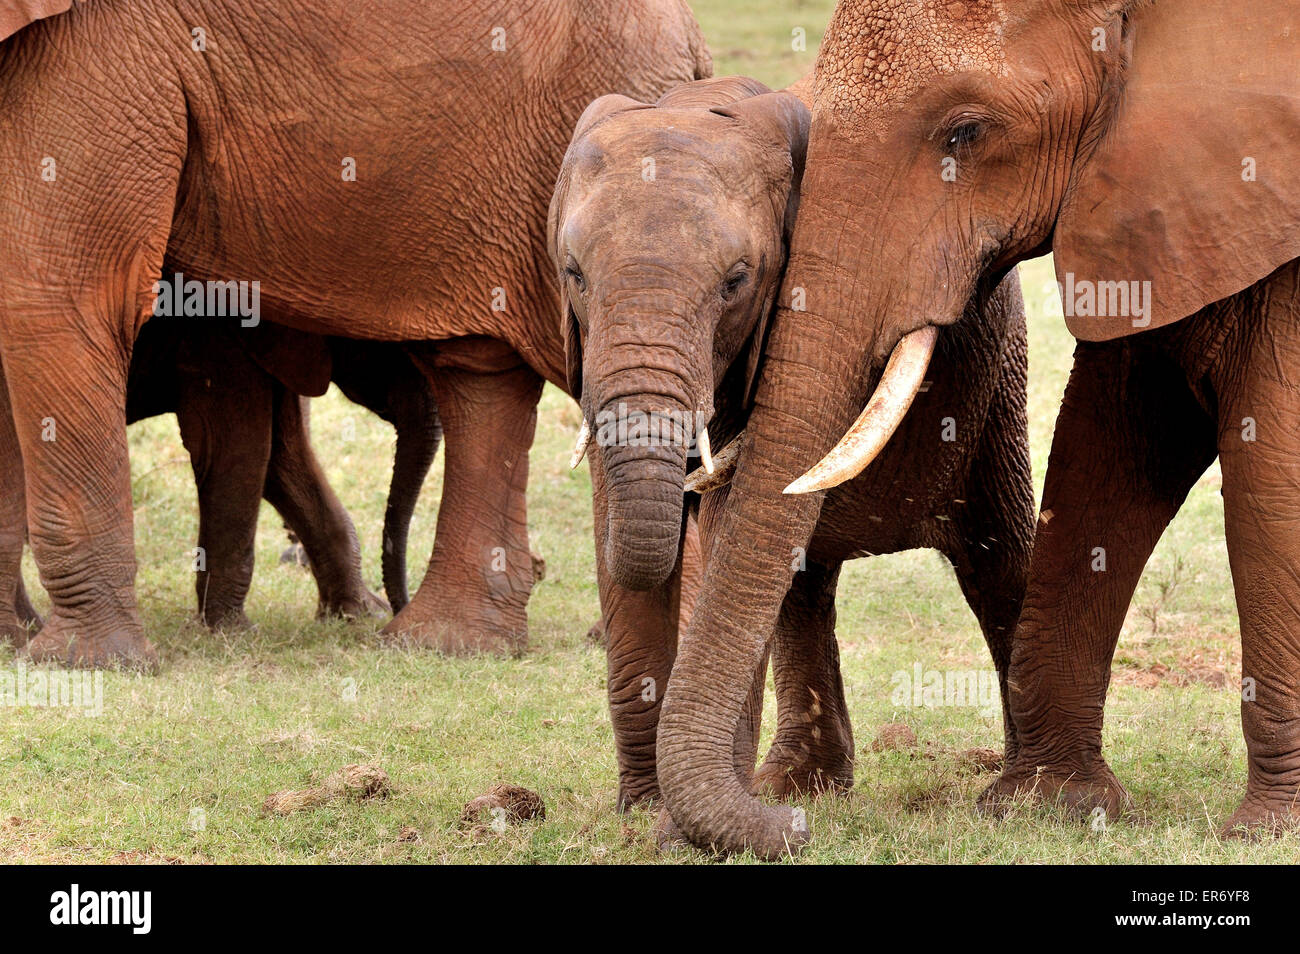 Young Elephant and its sister with tender feelings Stock Photo